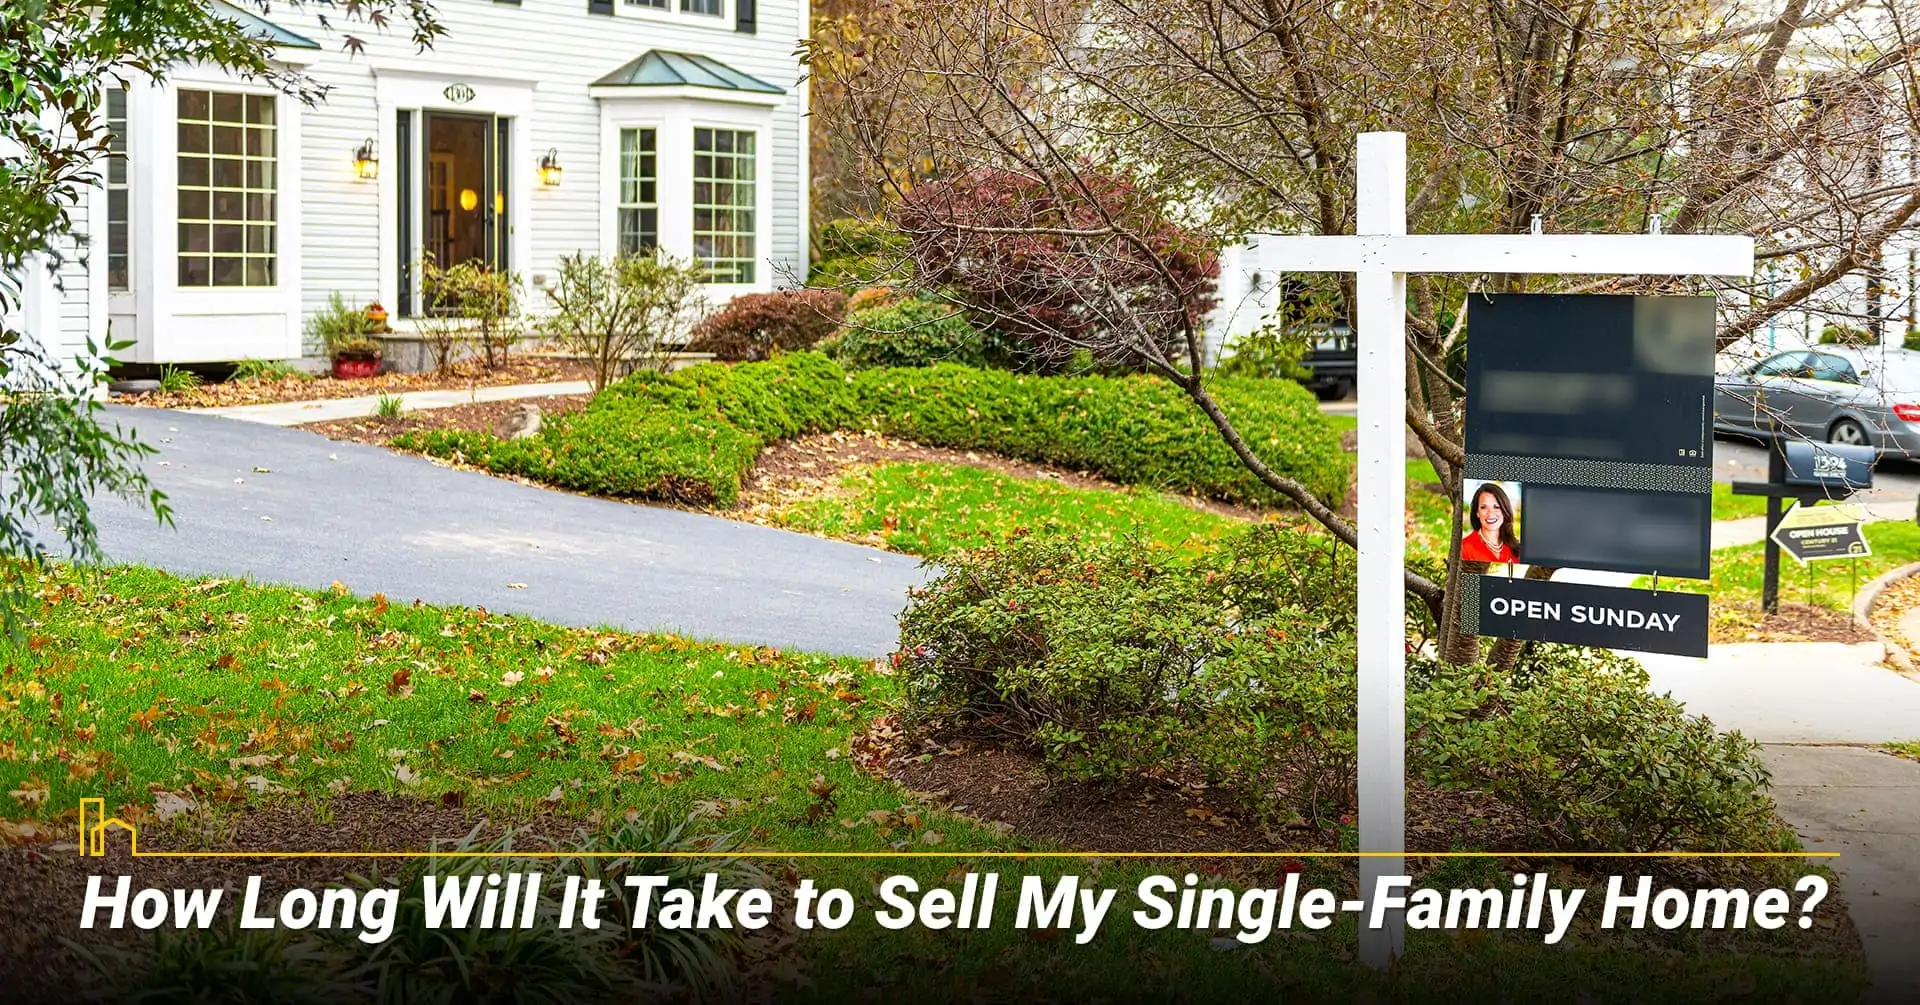 How Long Will It Take to Sell My Single-Family Home? Time it takes to sell your home